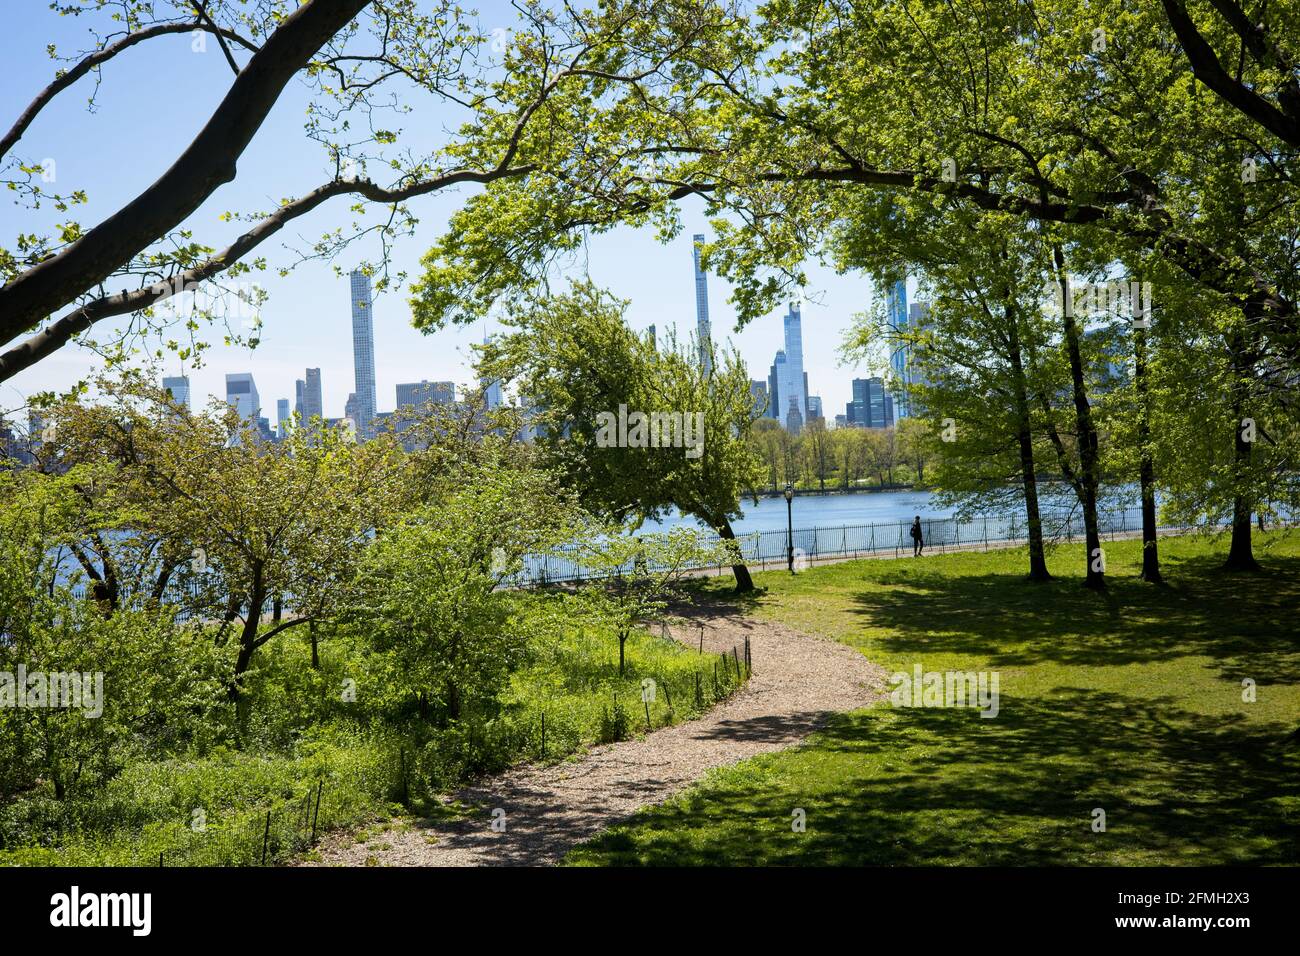 New York, NY, USA - May 9, 2021: Pathway in Central Park leading to Onassis Reservoir with supertall skyscrapers in background Stock Photo